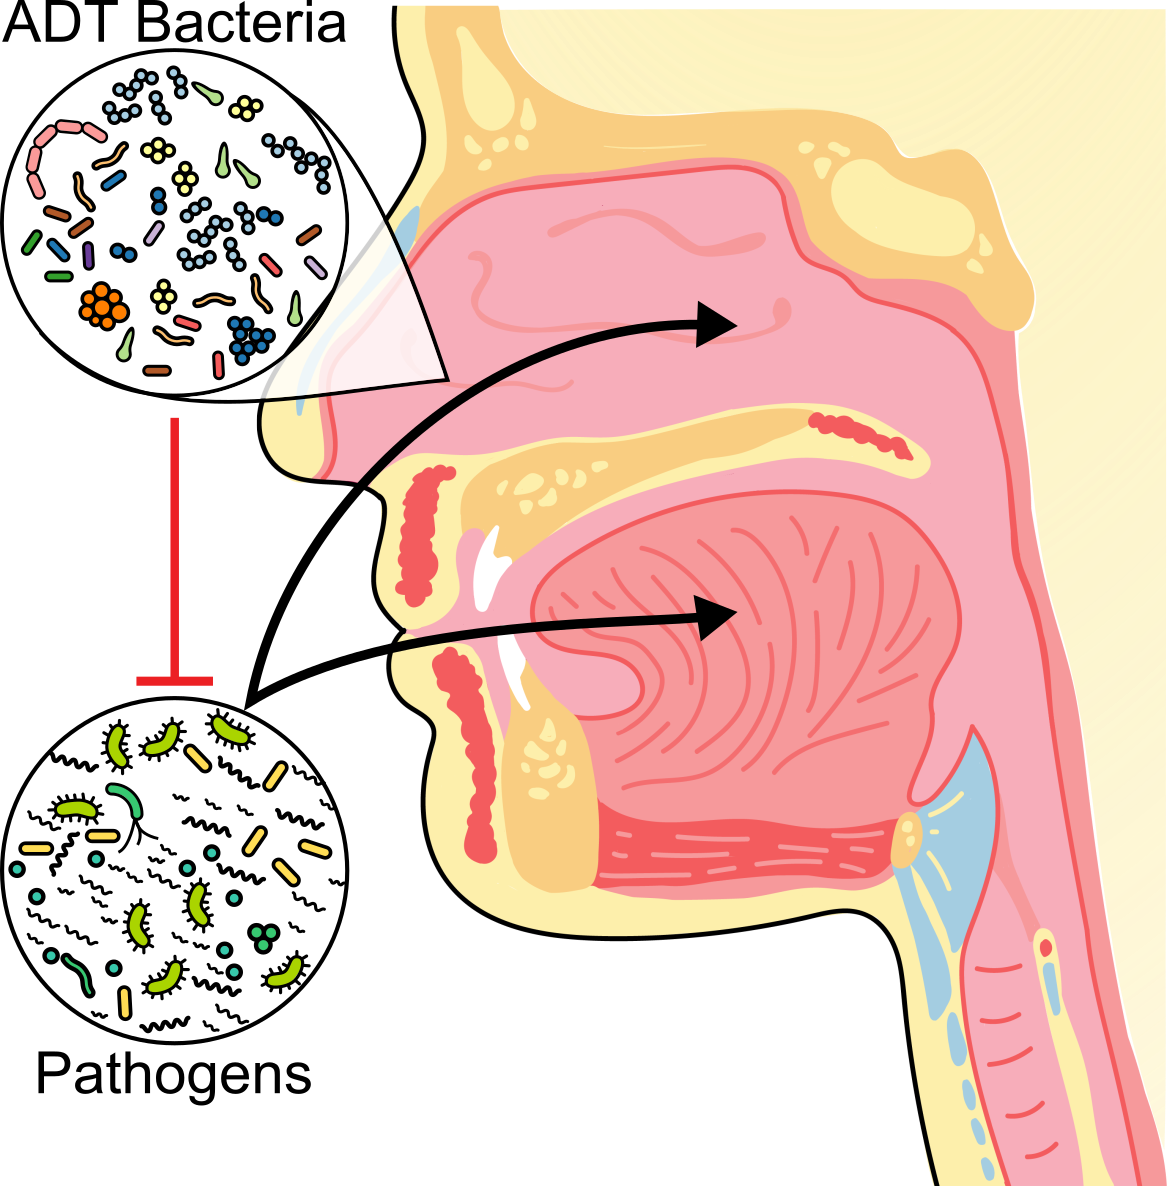 Cartoon Diagram showing inhibition of pathogens by aerodigestive tract bacteria